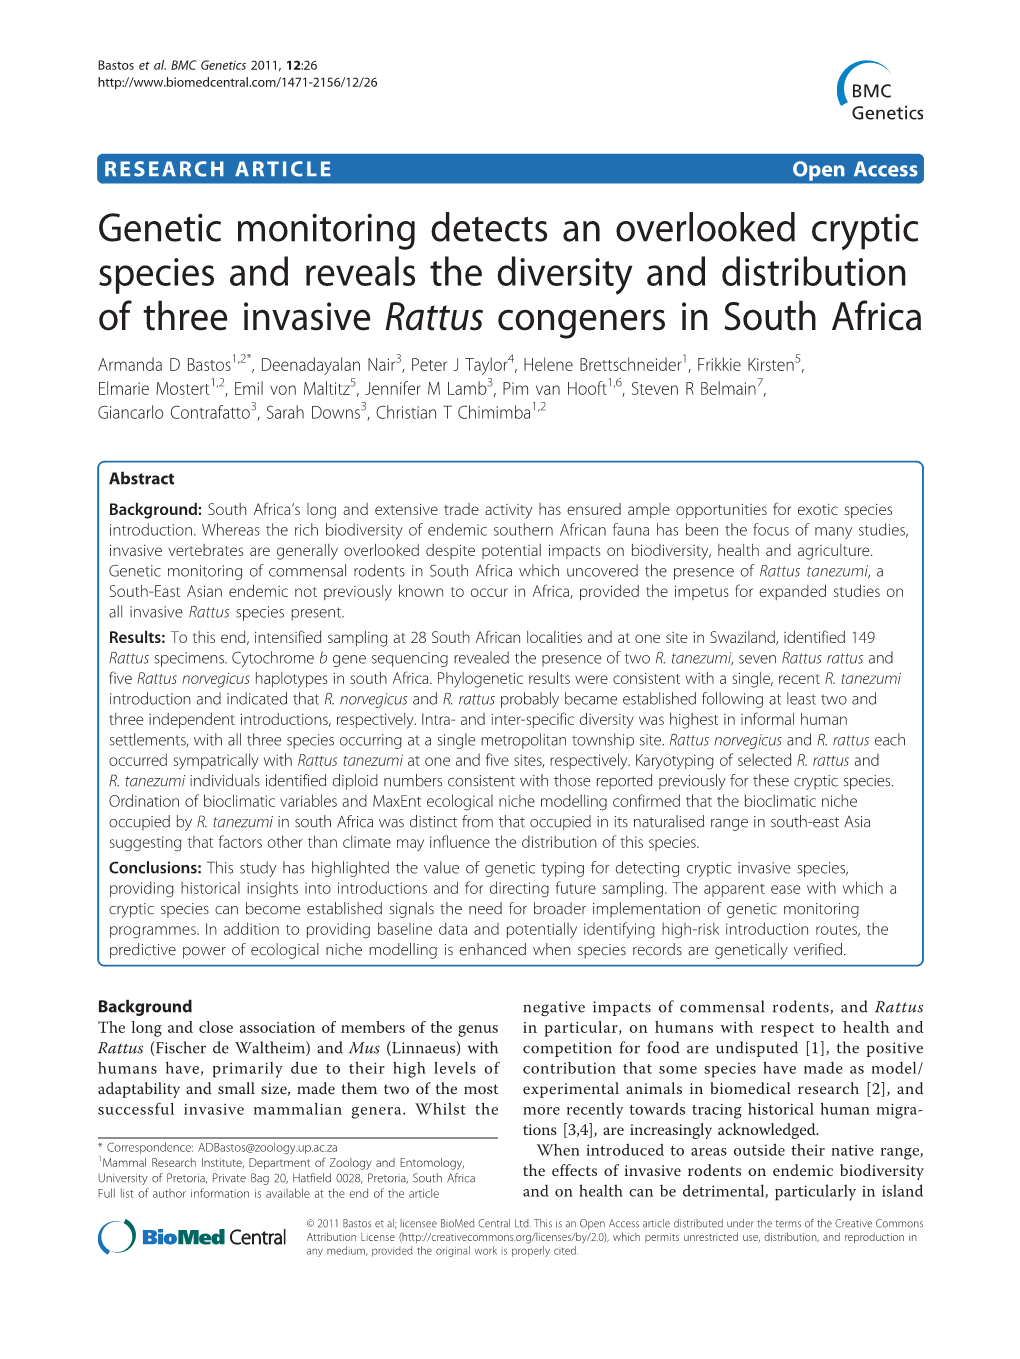 Genetic Monitoring Detects an Overlooked Cryptic Species And